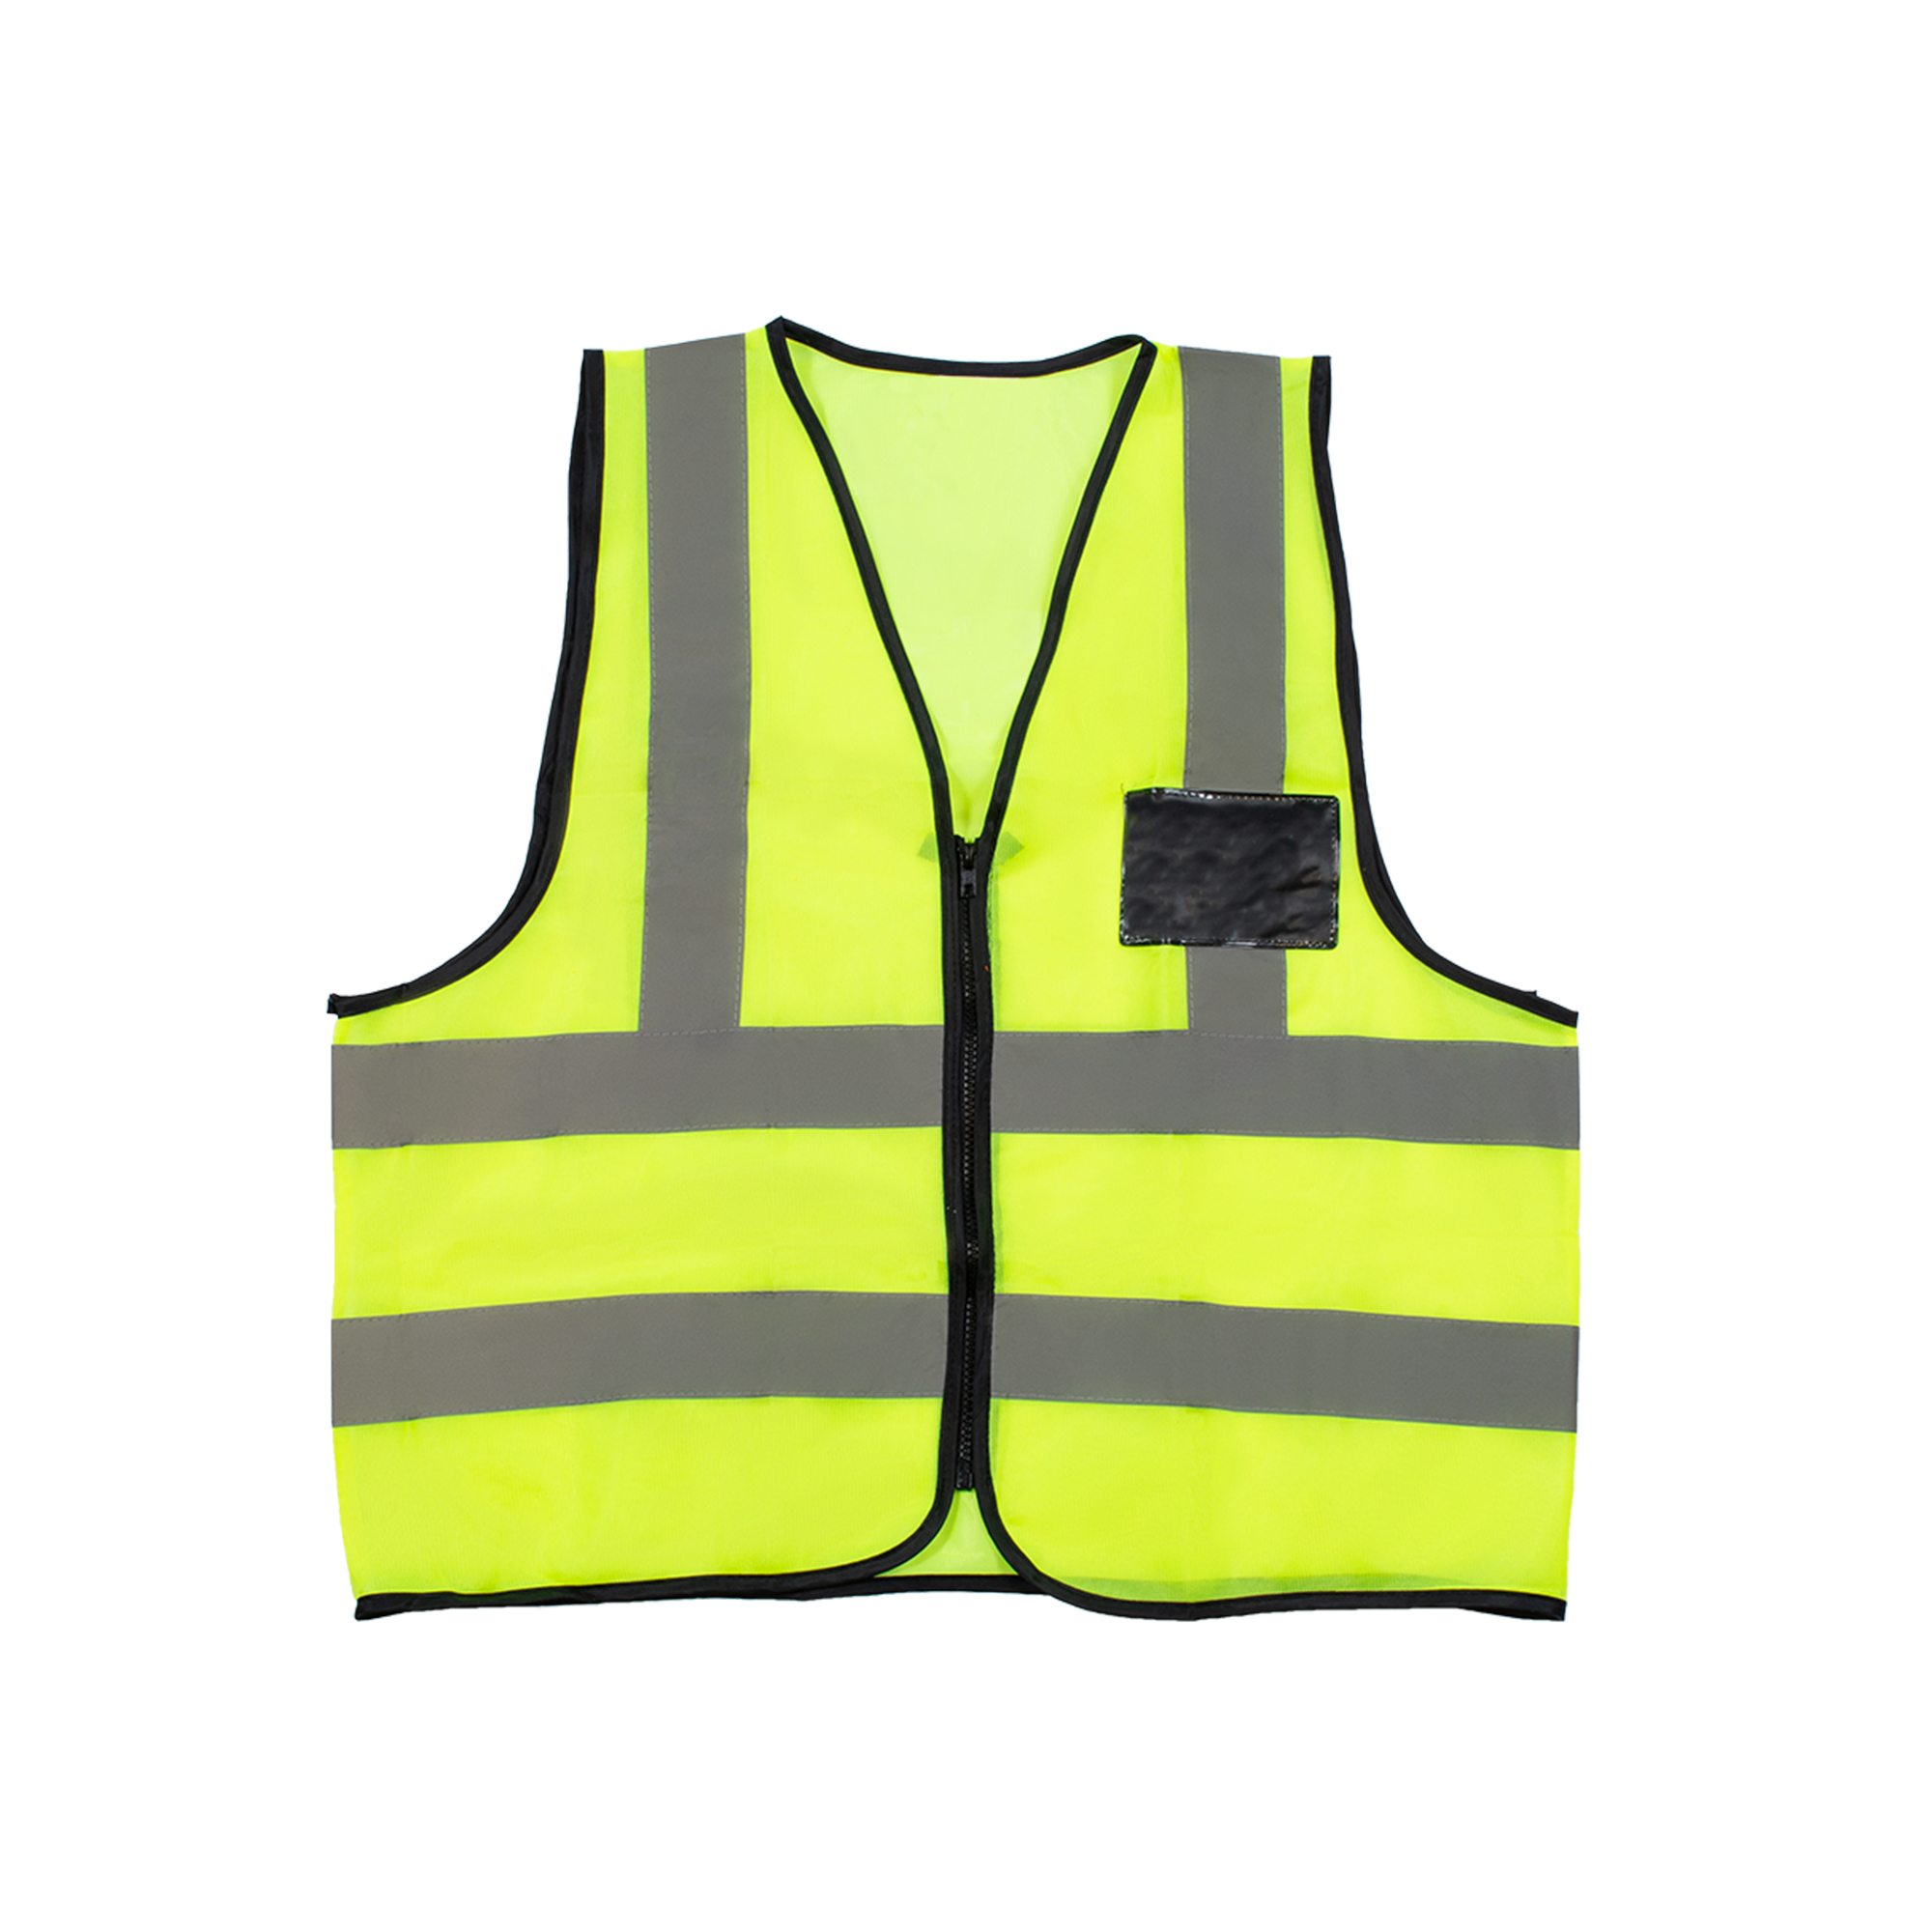 Value Reflective Vest with Zip and ID Pocket - Protekta Safety Gear